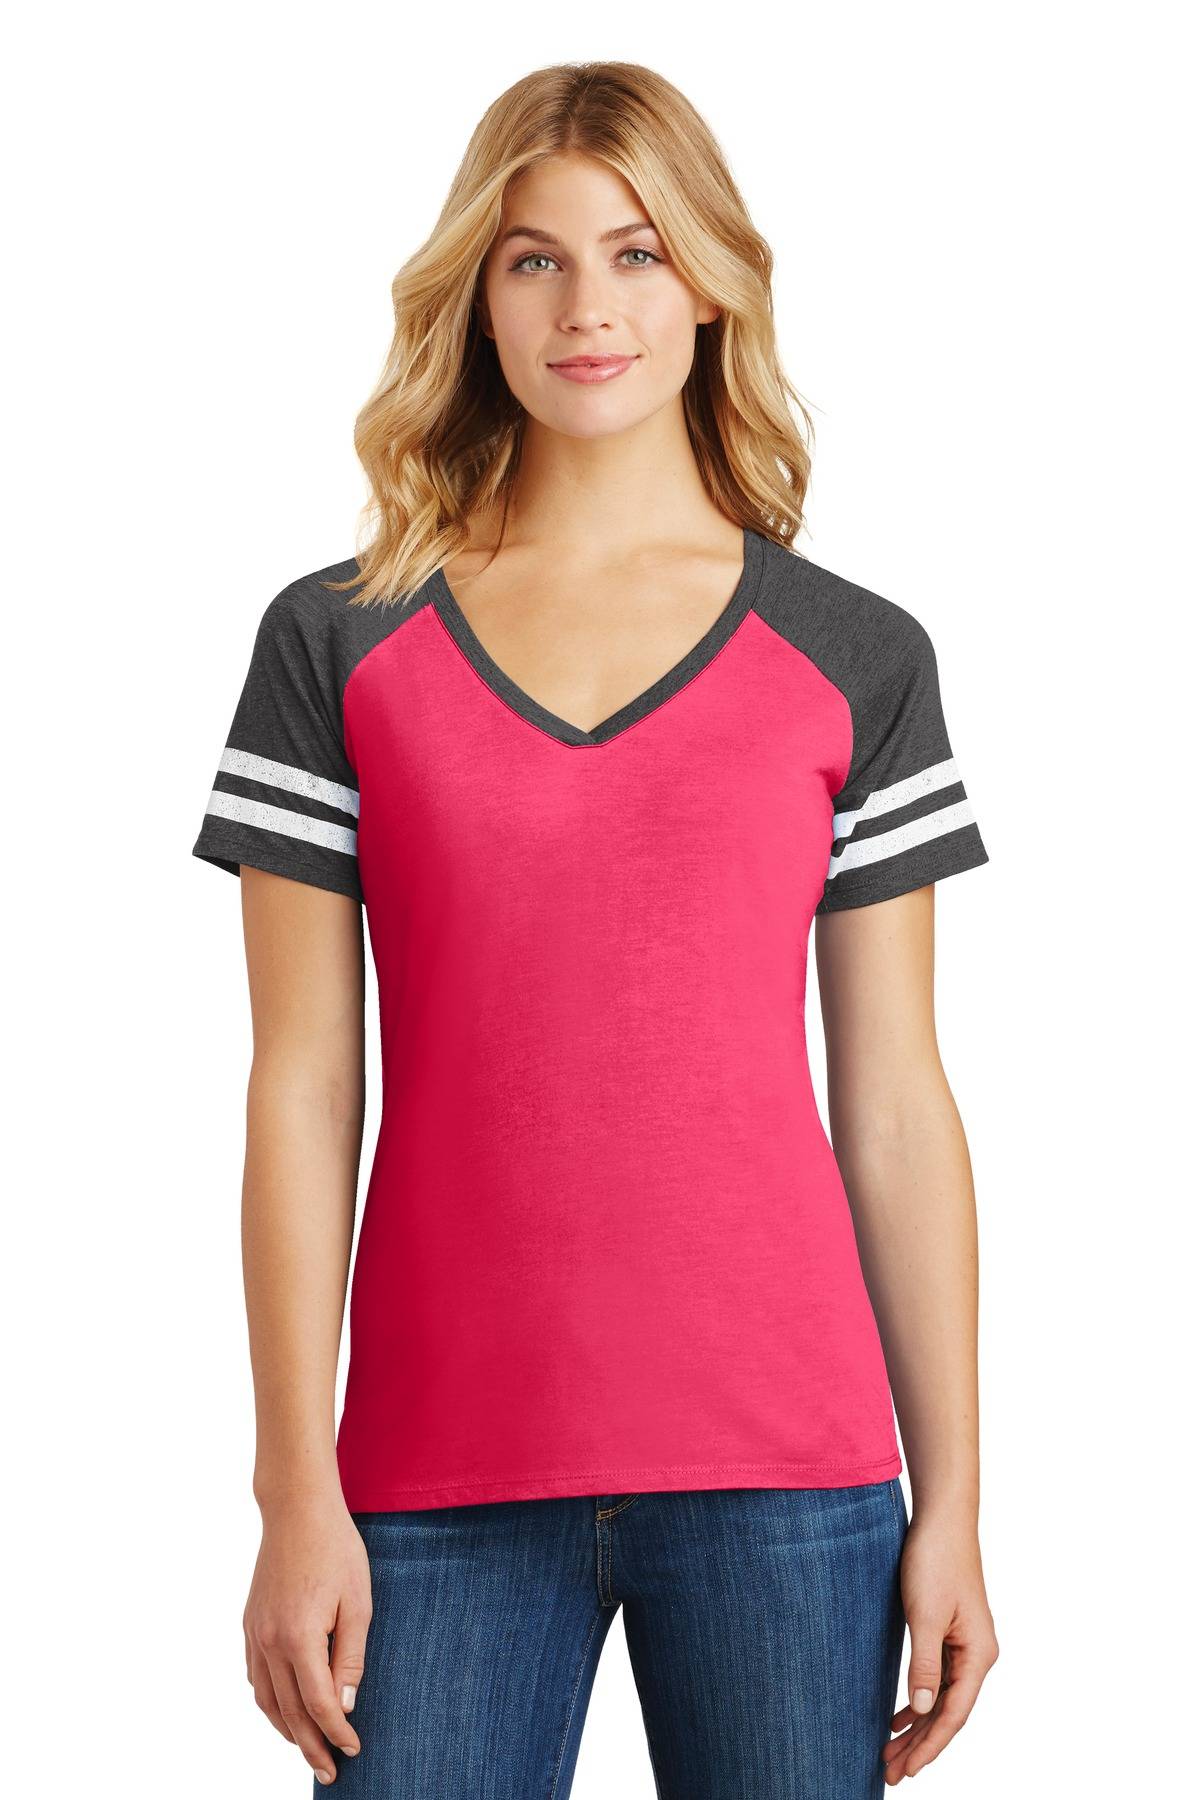 NEW District Made® Ladies Game V-Neck Tee DM476 